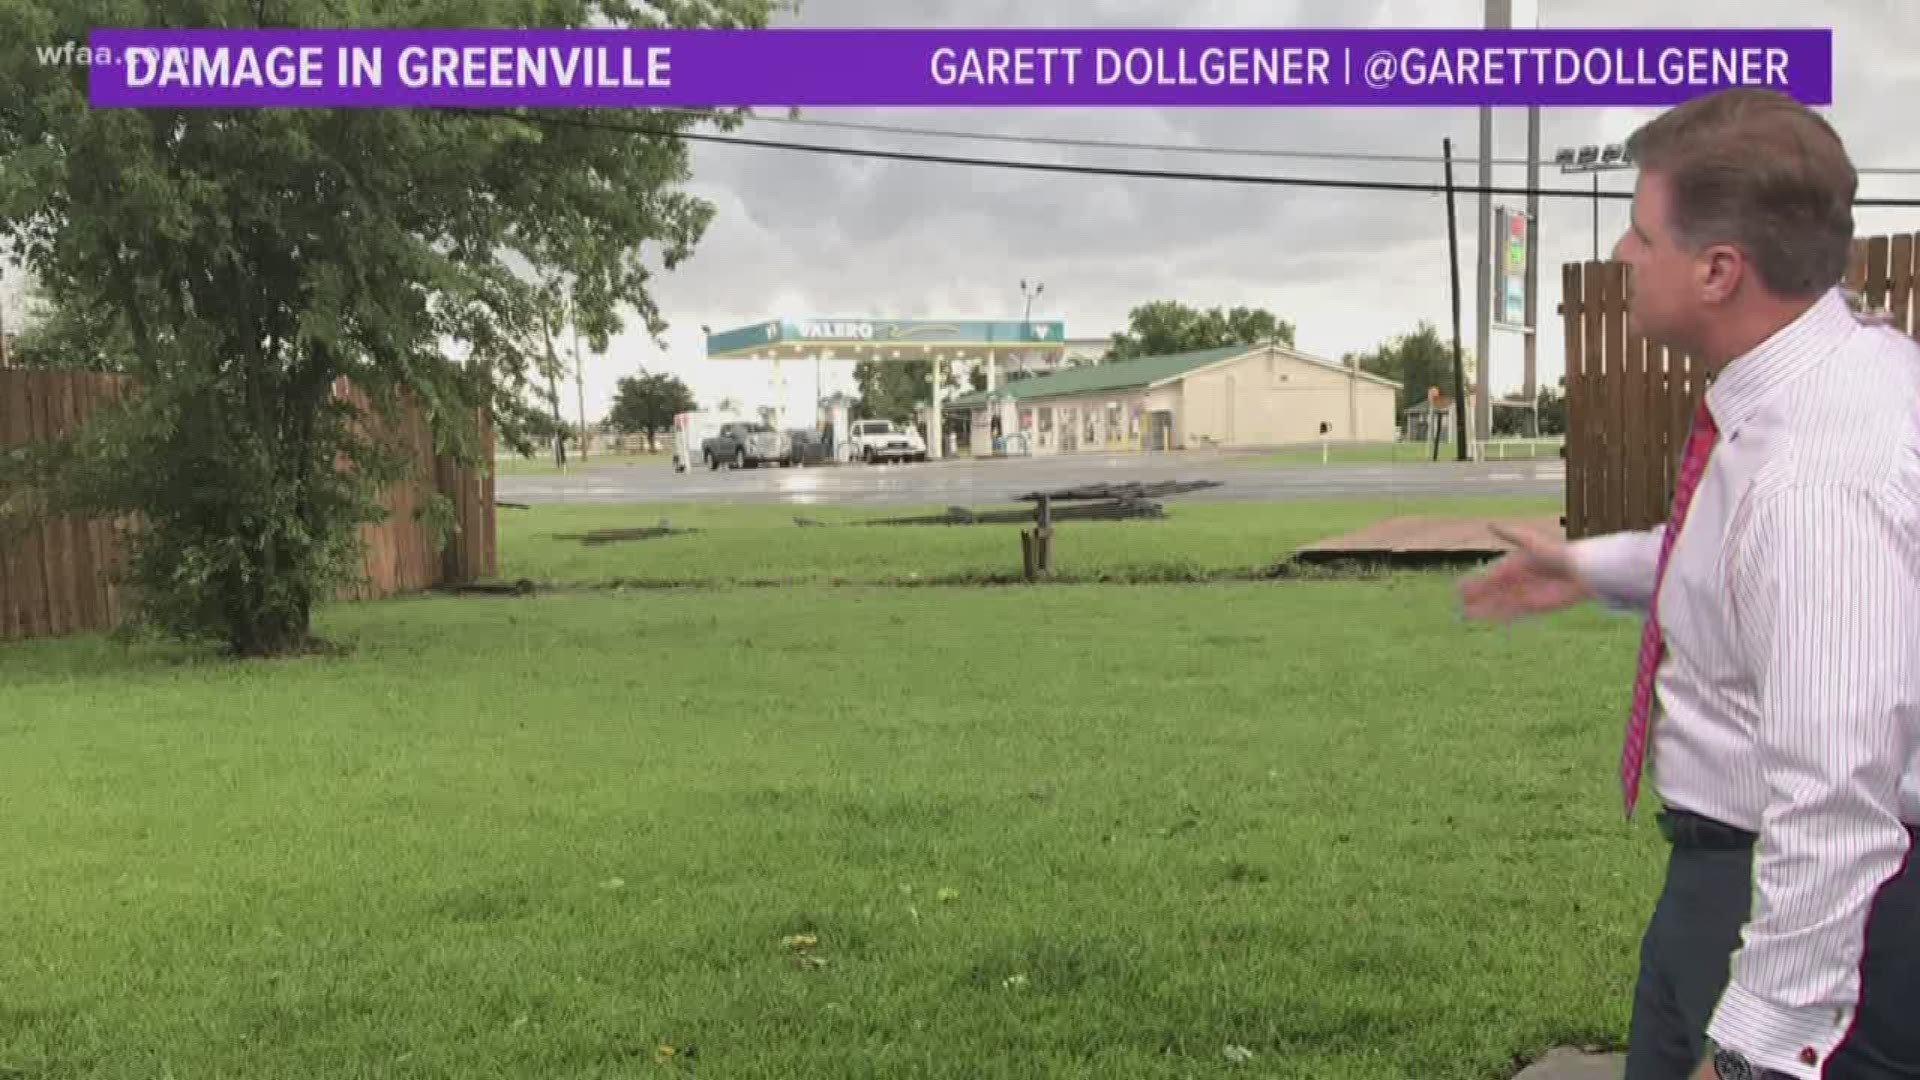 Damage has already been reported in Greenville.